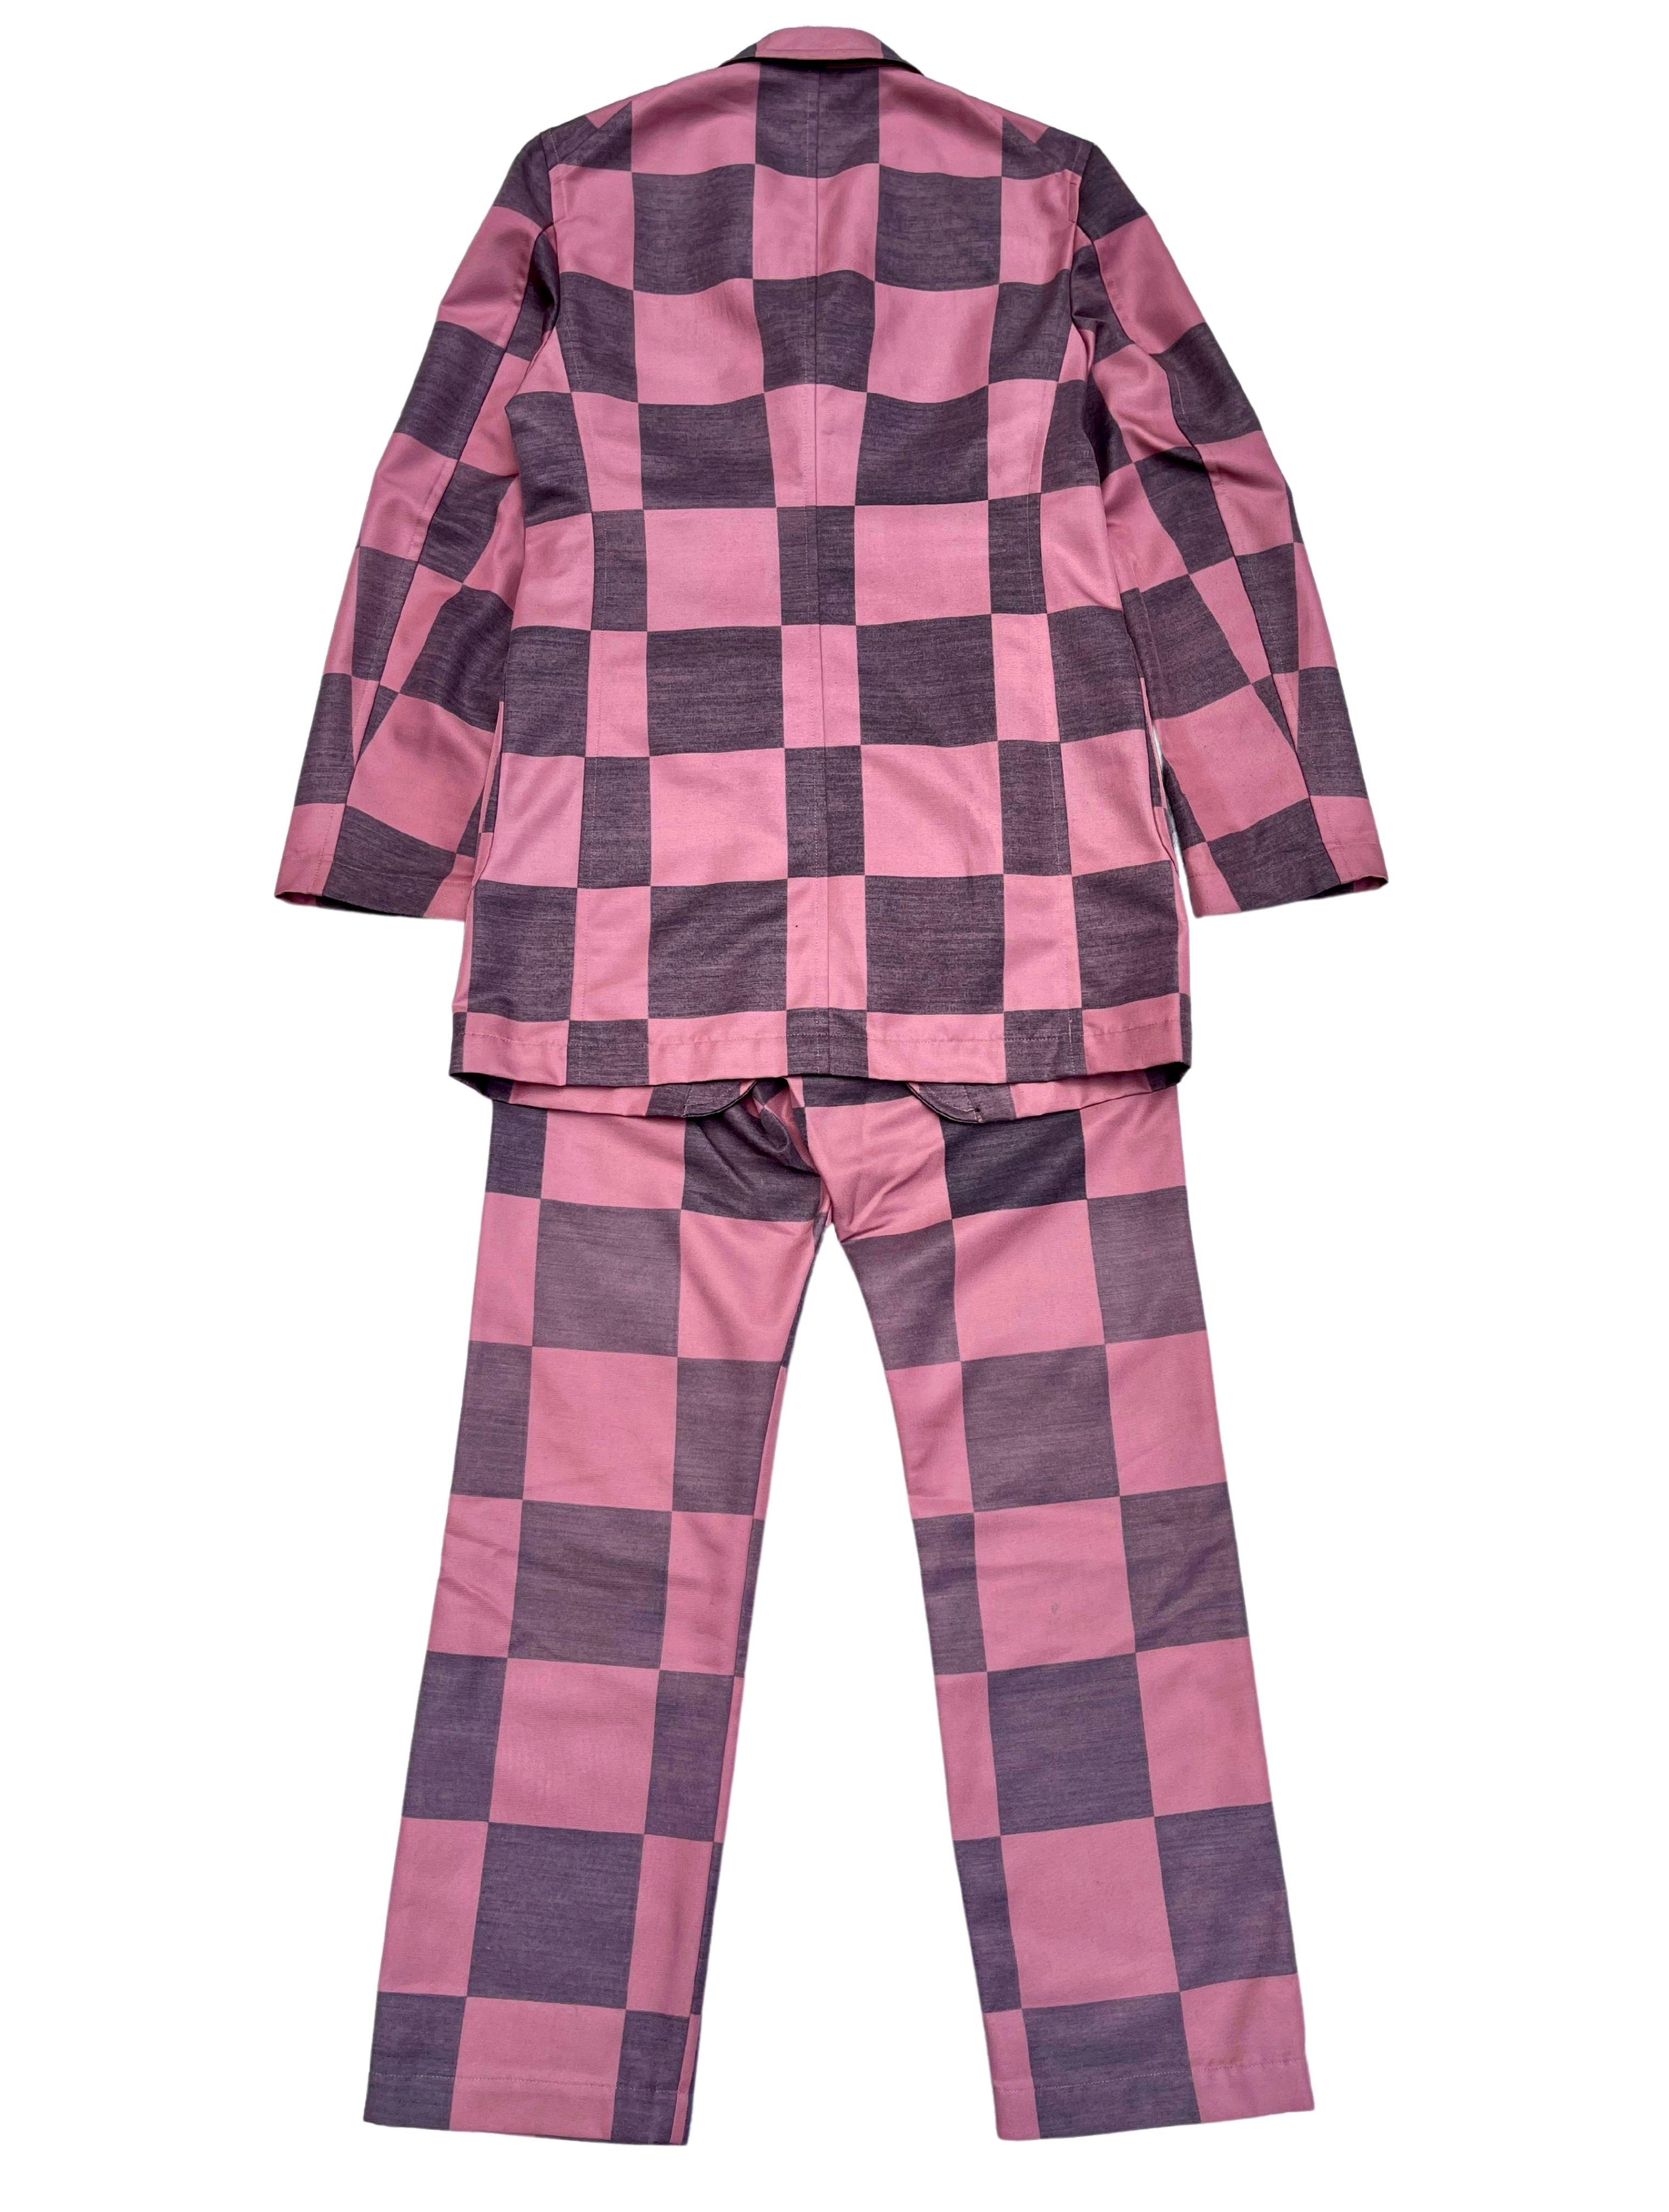 Vintage COMME des GARCONS HOMME PLUS checkered suit comes in black, pink textured wool with a notch lapel, single breasted three button front, bold checkered lining. The pants featured matching patterns. A collectors item. Made in Japan.

Size on